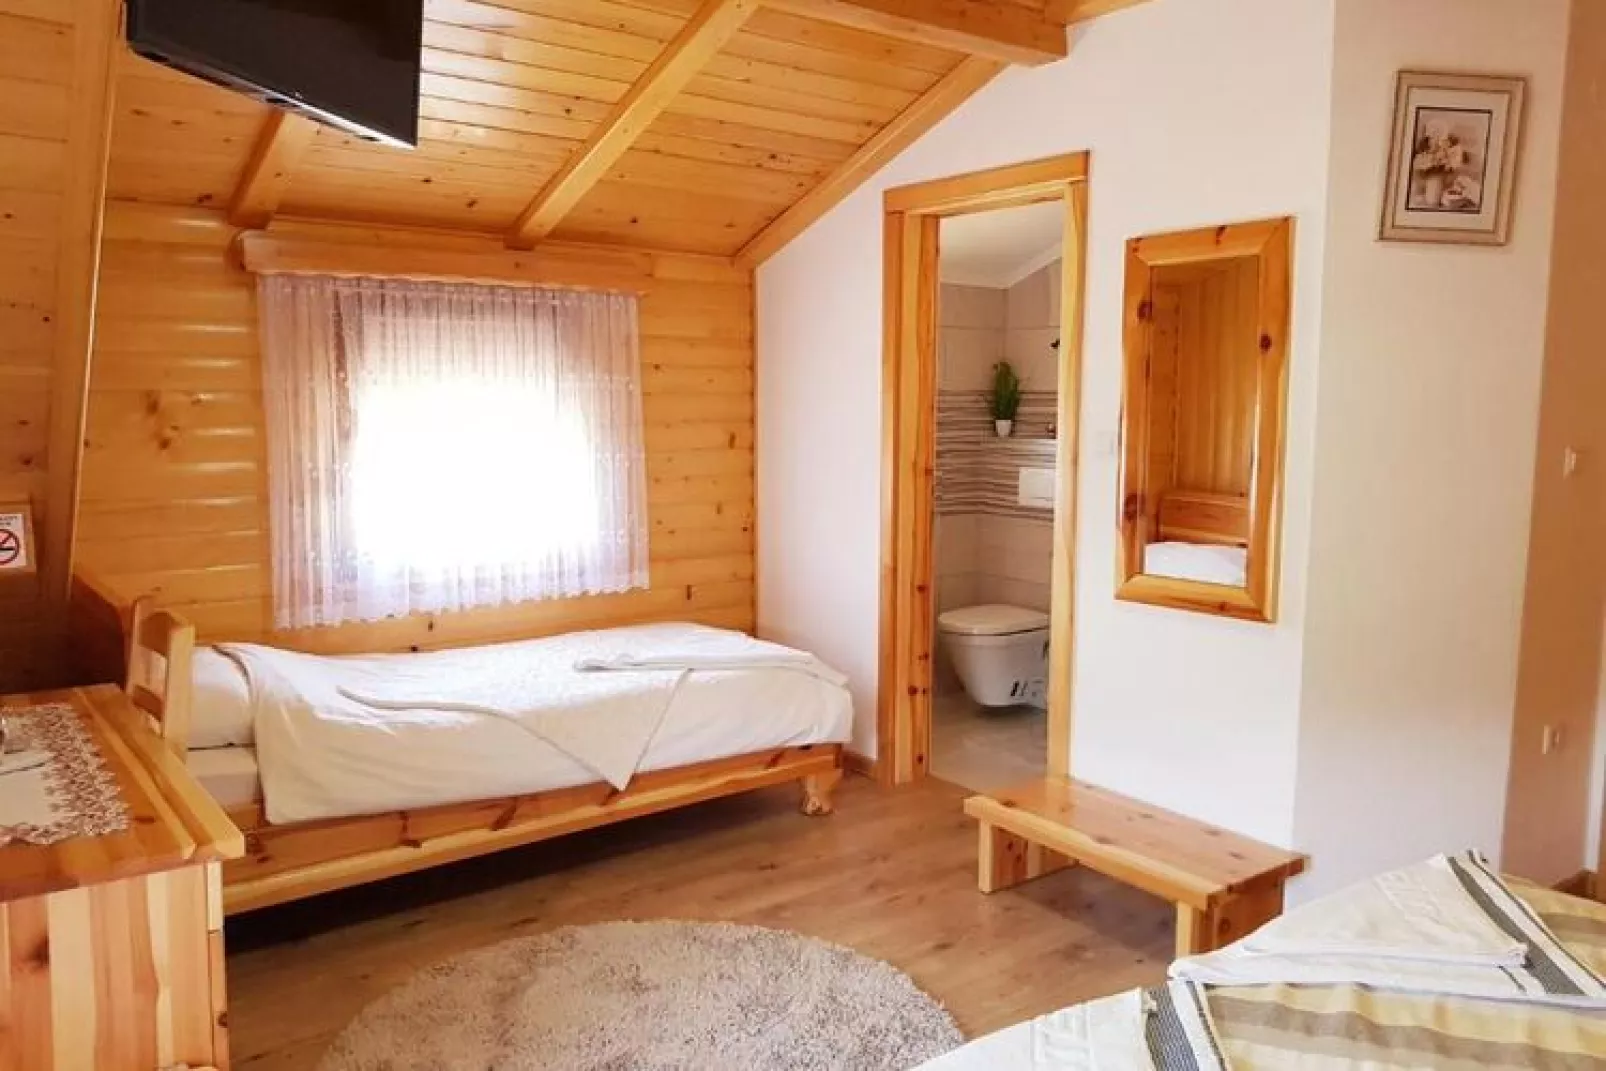 Green Valley Guesthouse 3-bed room 3 person-Slaapkamer